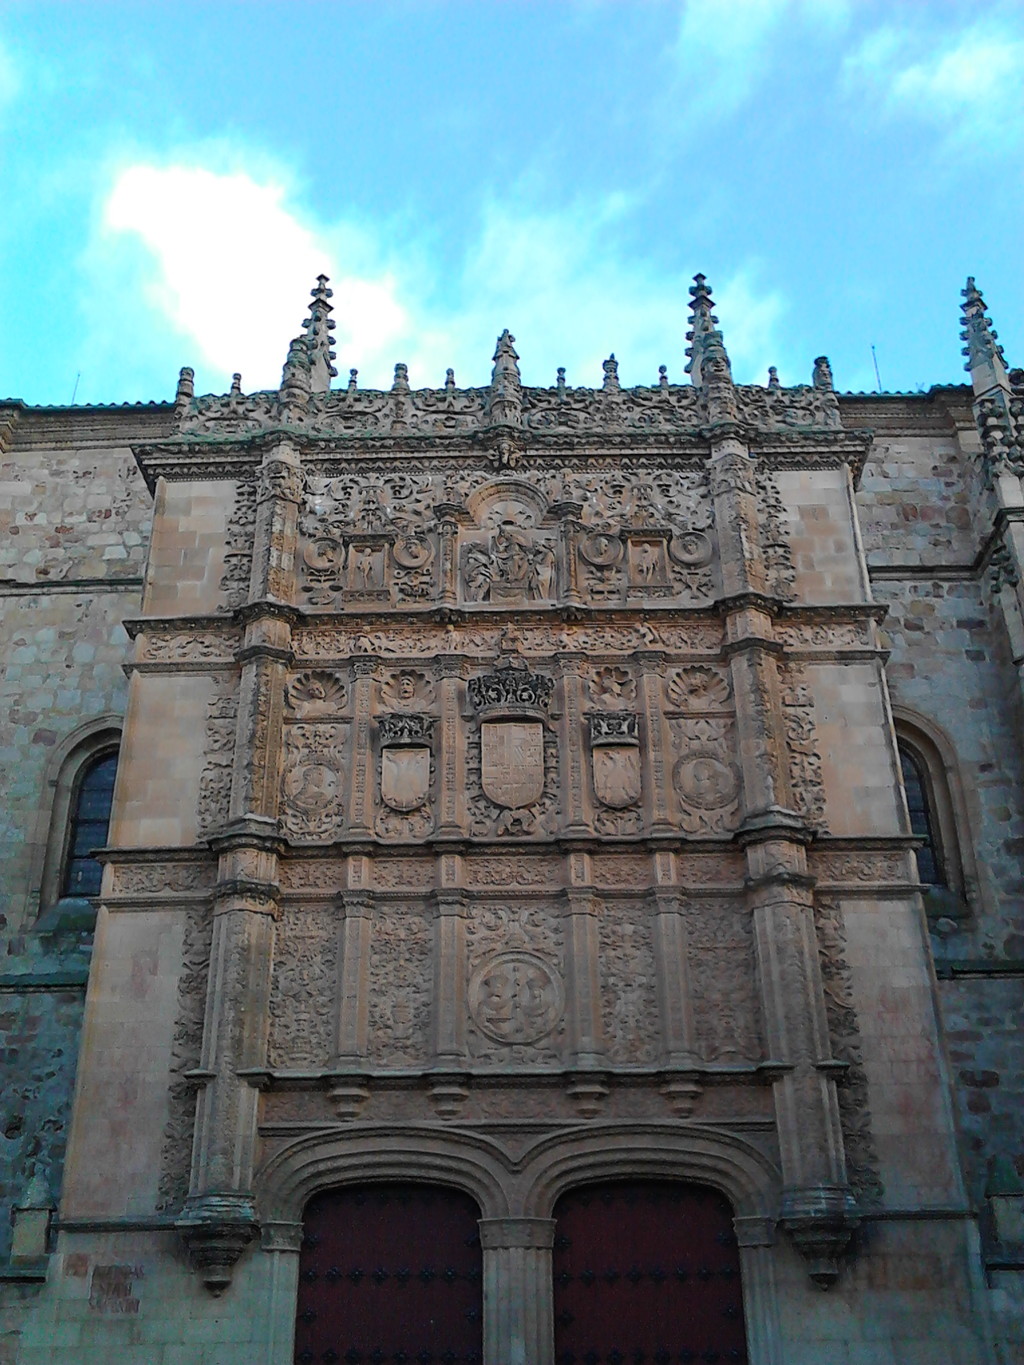 The oldest University in Spain